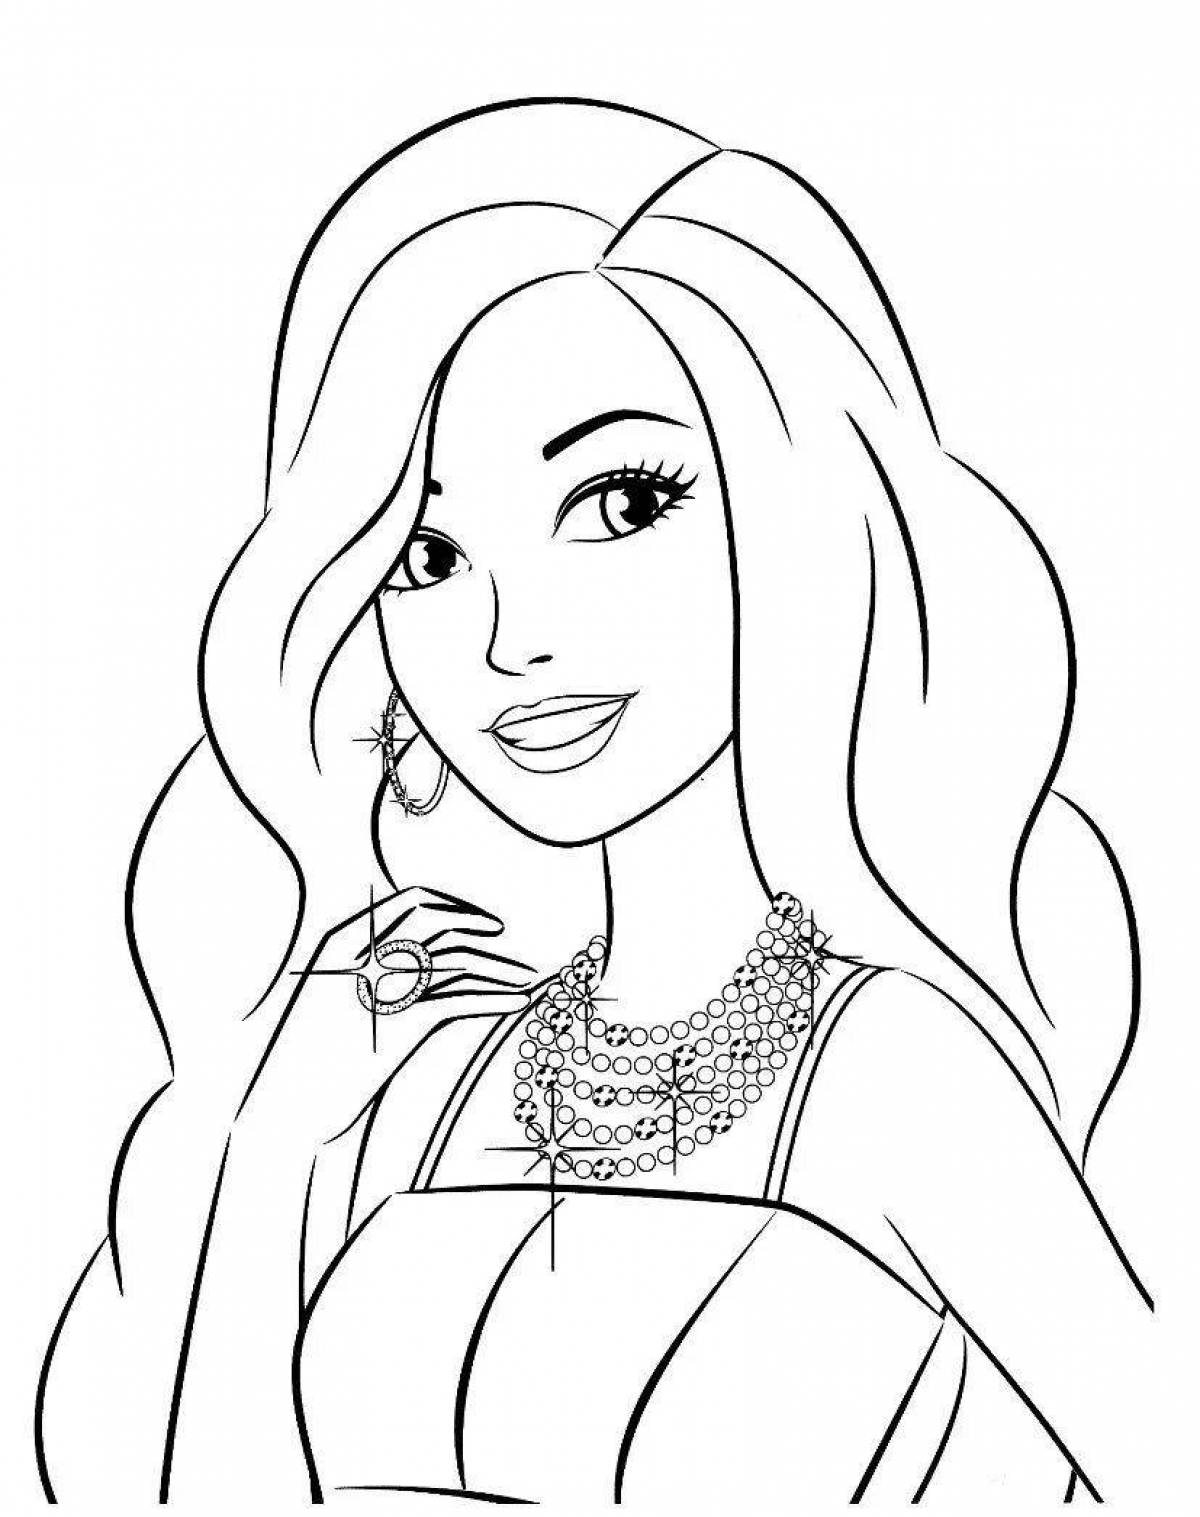 Funny barbie coloring page drawing